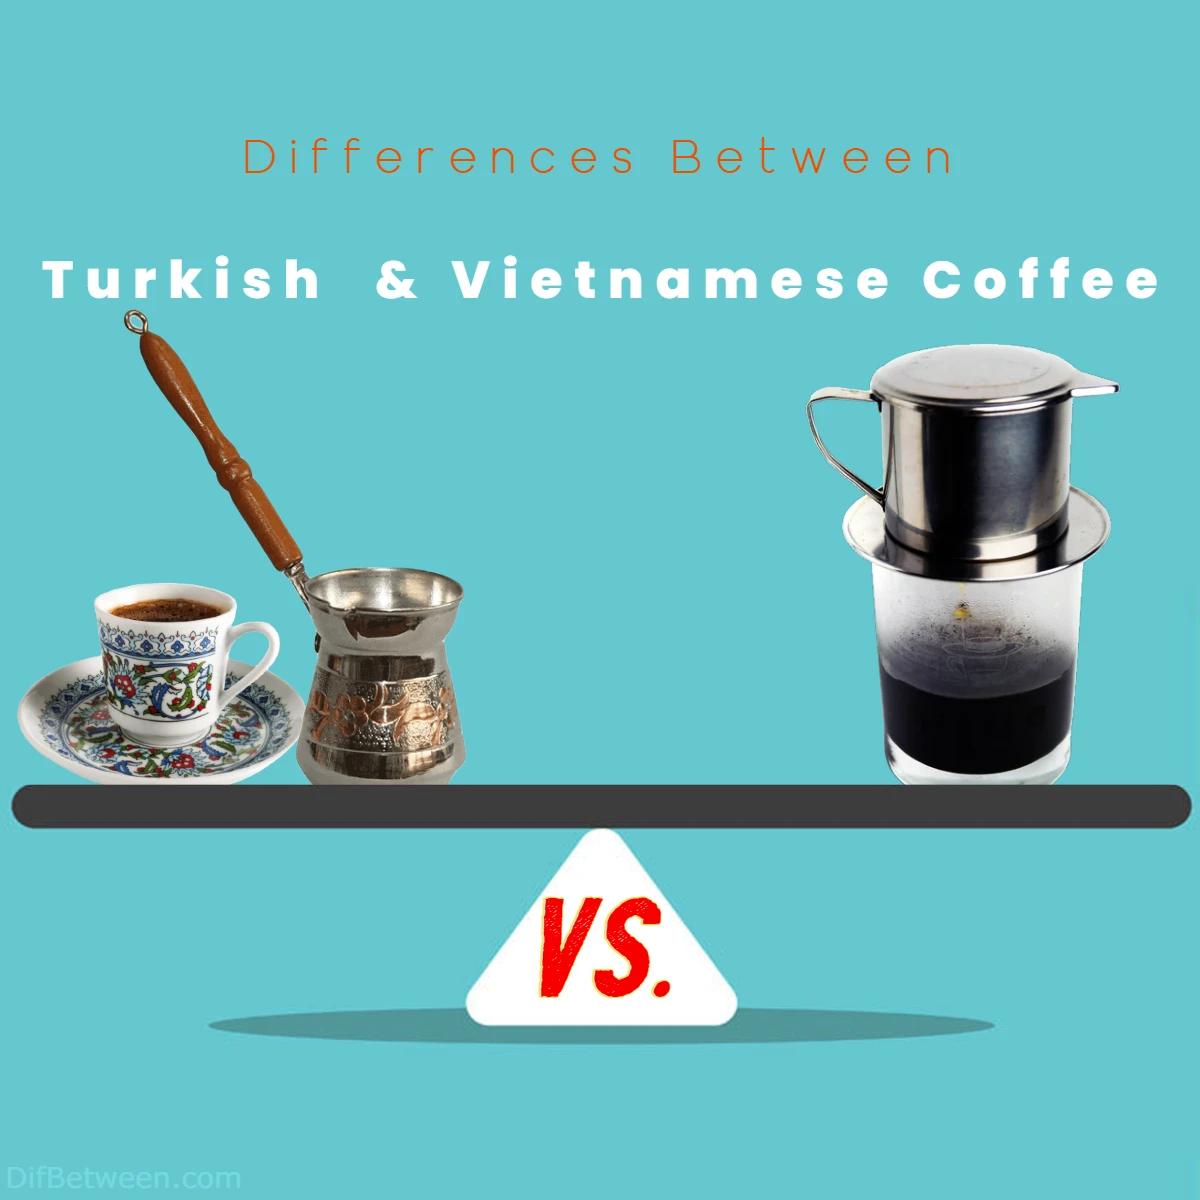 Differences Between Vietnamese Coffee and Turkish Coffee